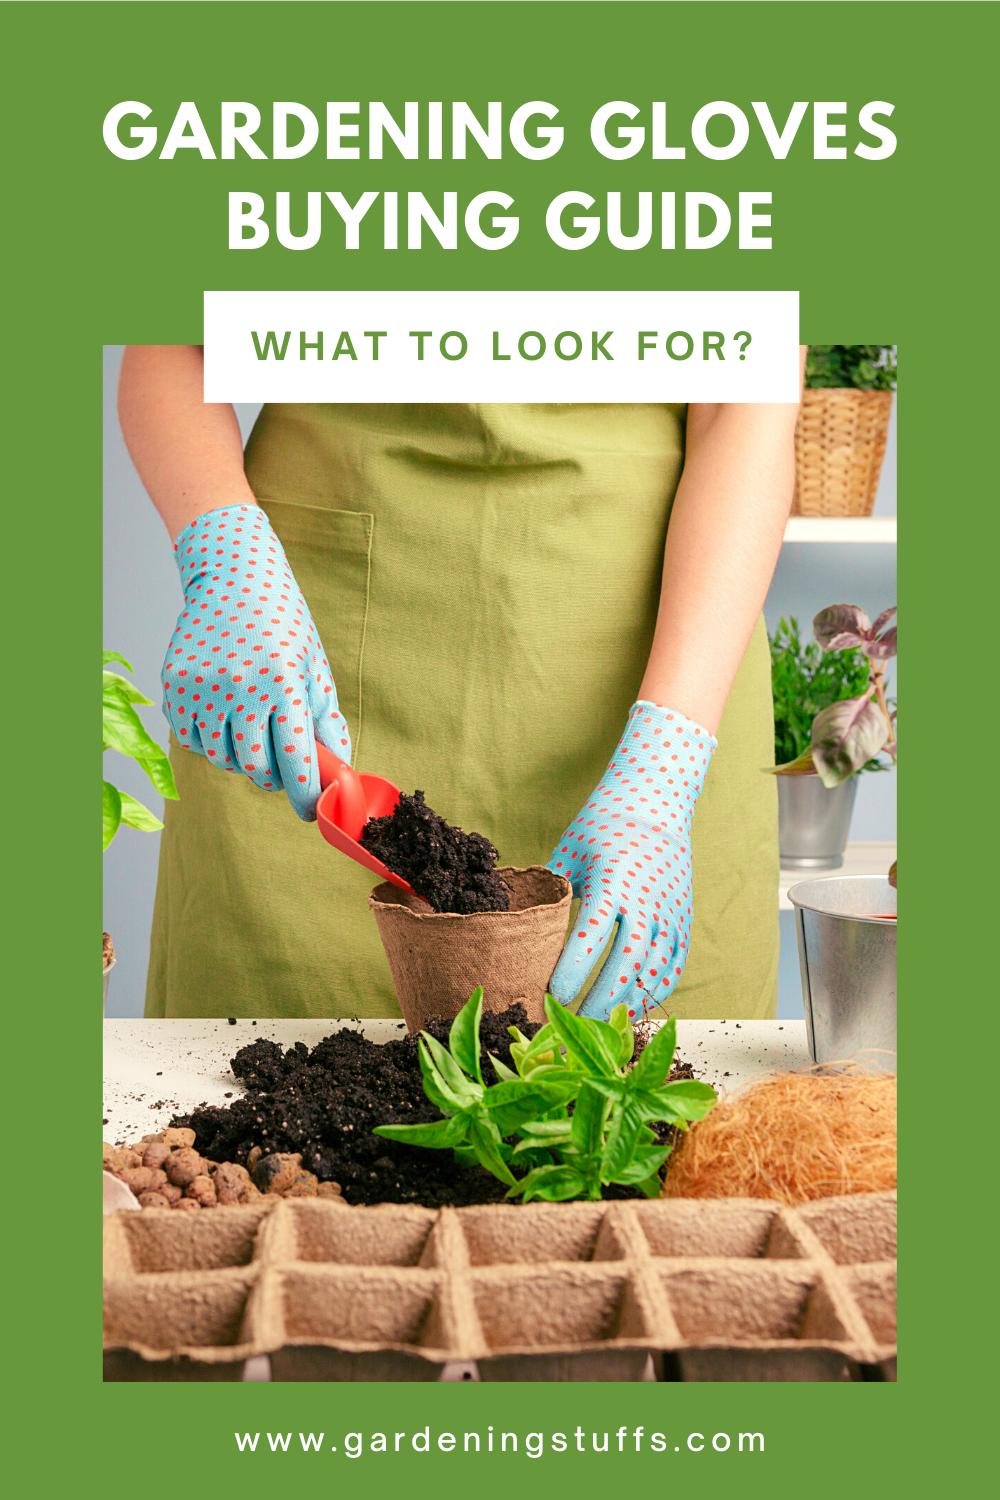 Getting a gardening glove today from the market today might seem so easy, however, visit the market and if you try getting one in real time and you will end up very confused. Here is a buying guide that could help you navigate through the market to get the best gardening gloves.